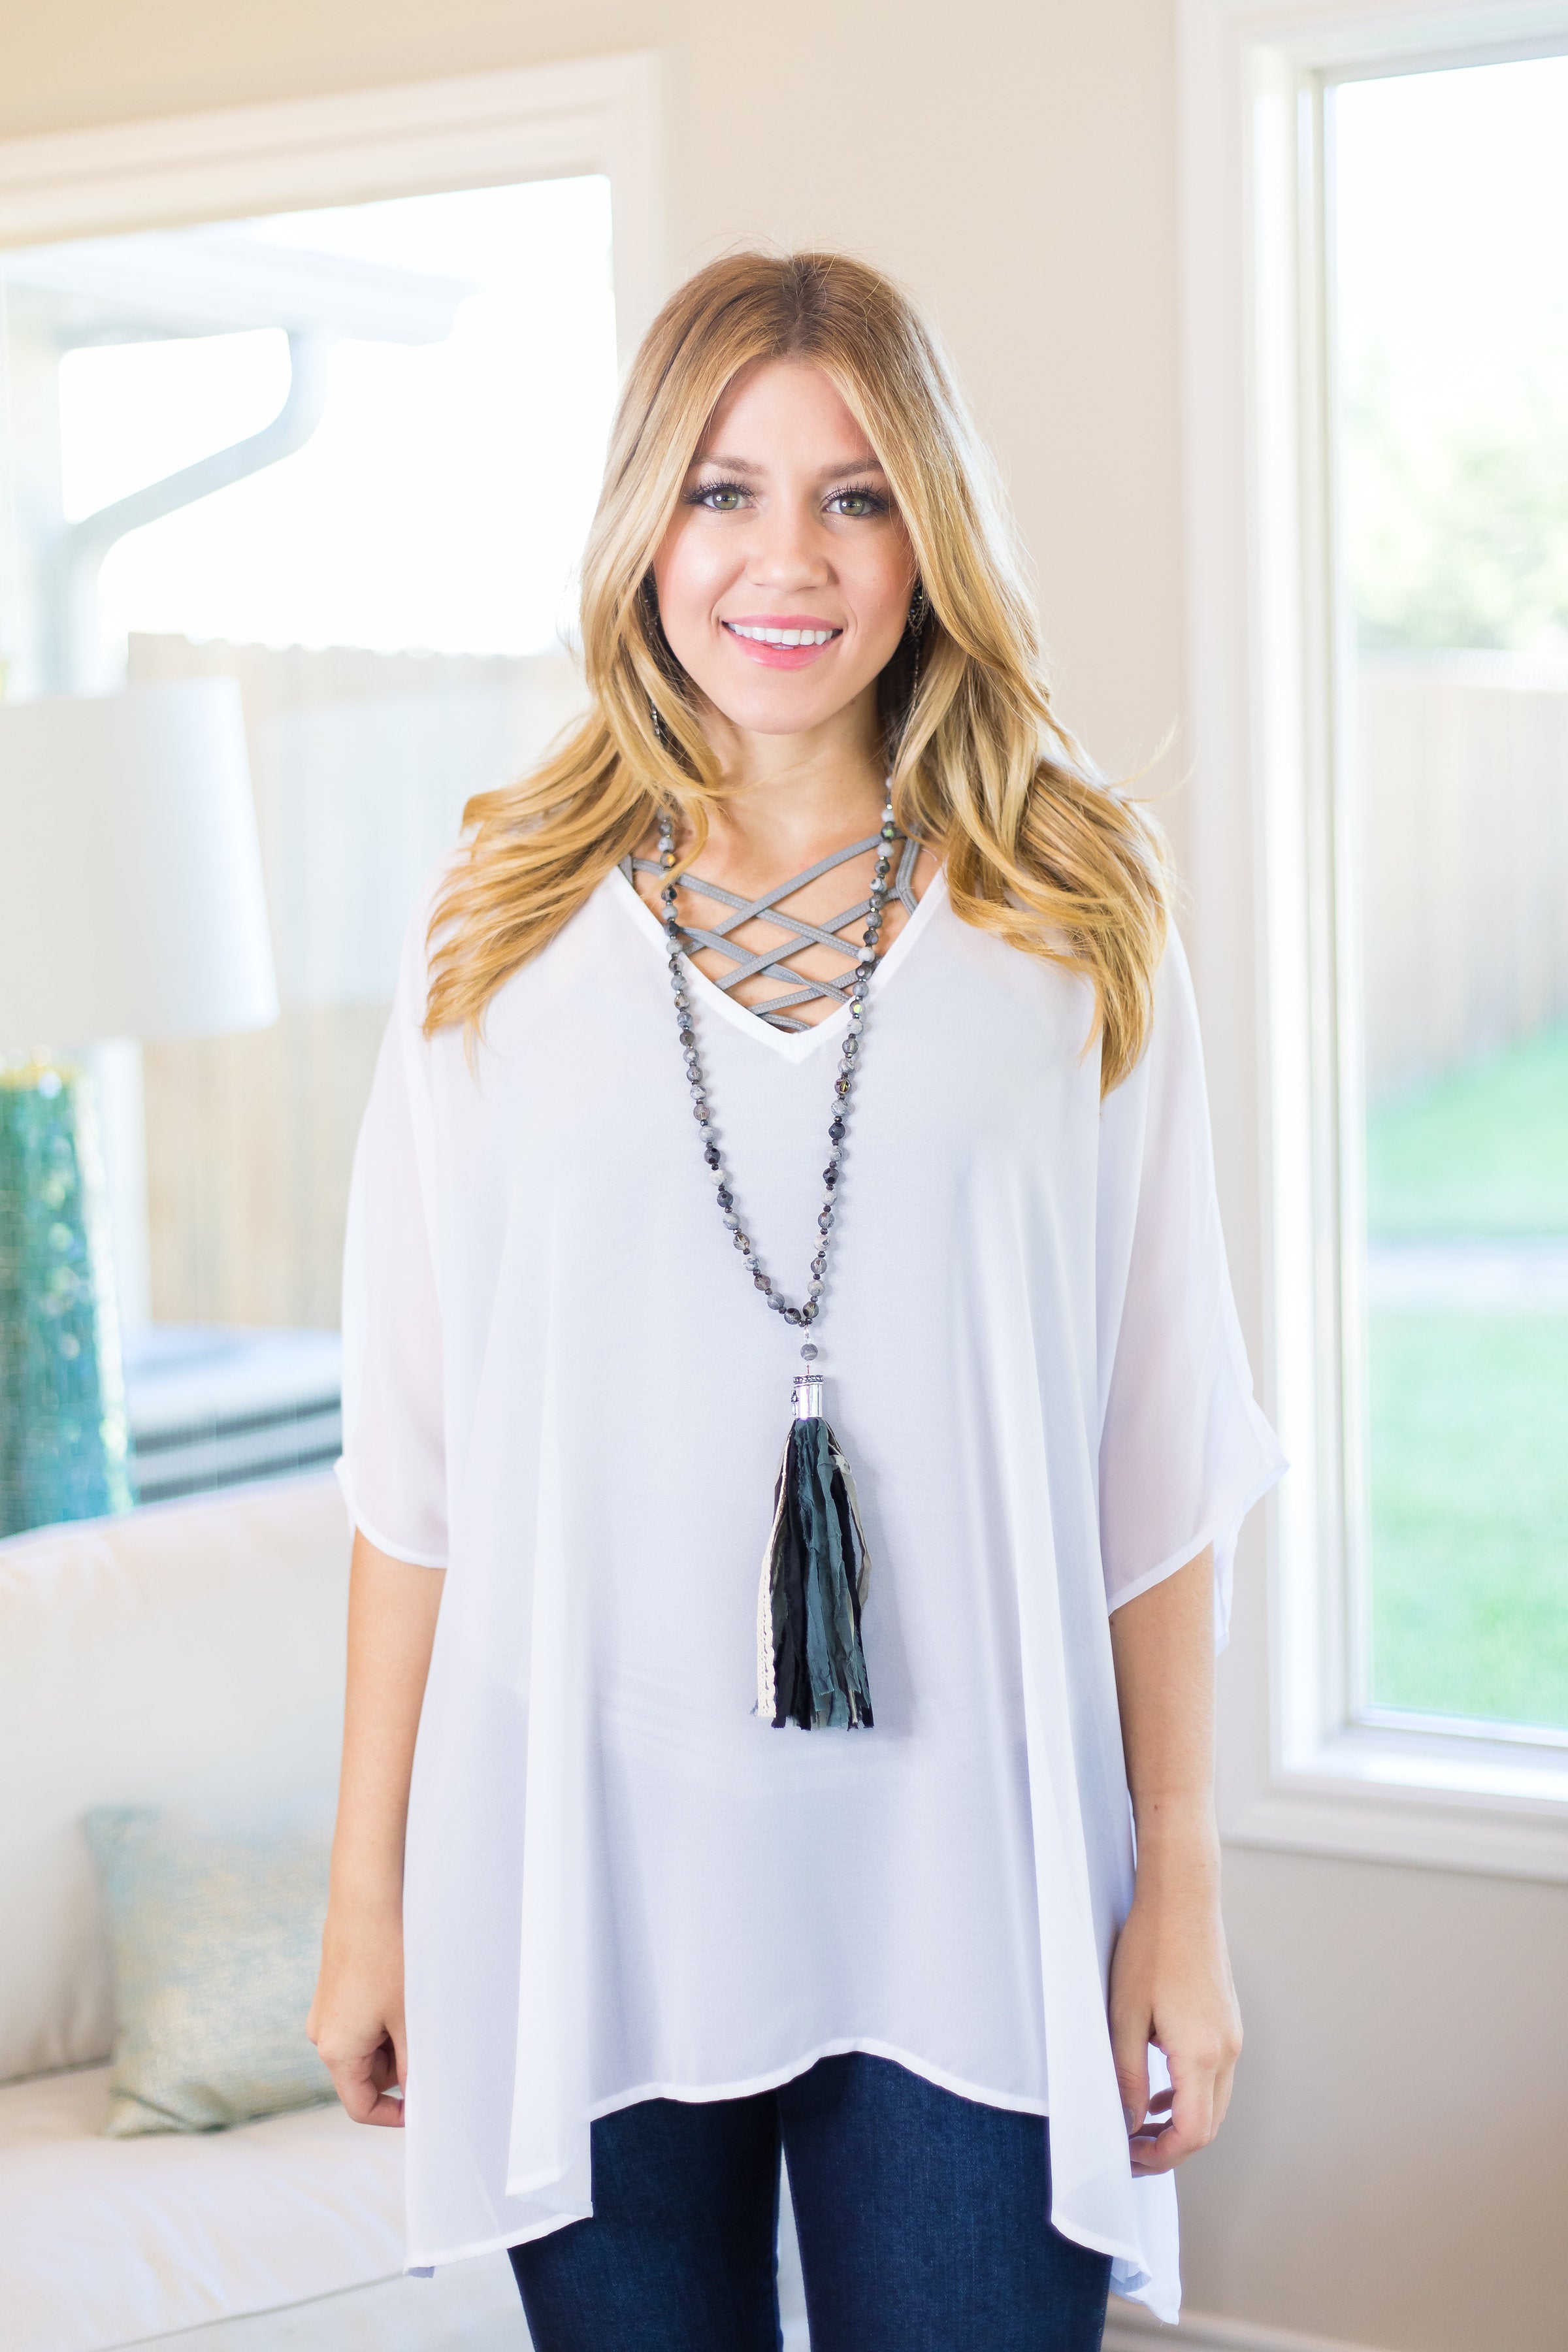 Last Chance Size Large | Sure Thing Sheer Oversized Poncho Top in White - Giddy Up Glamour Boutique